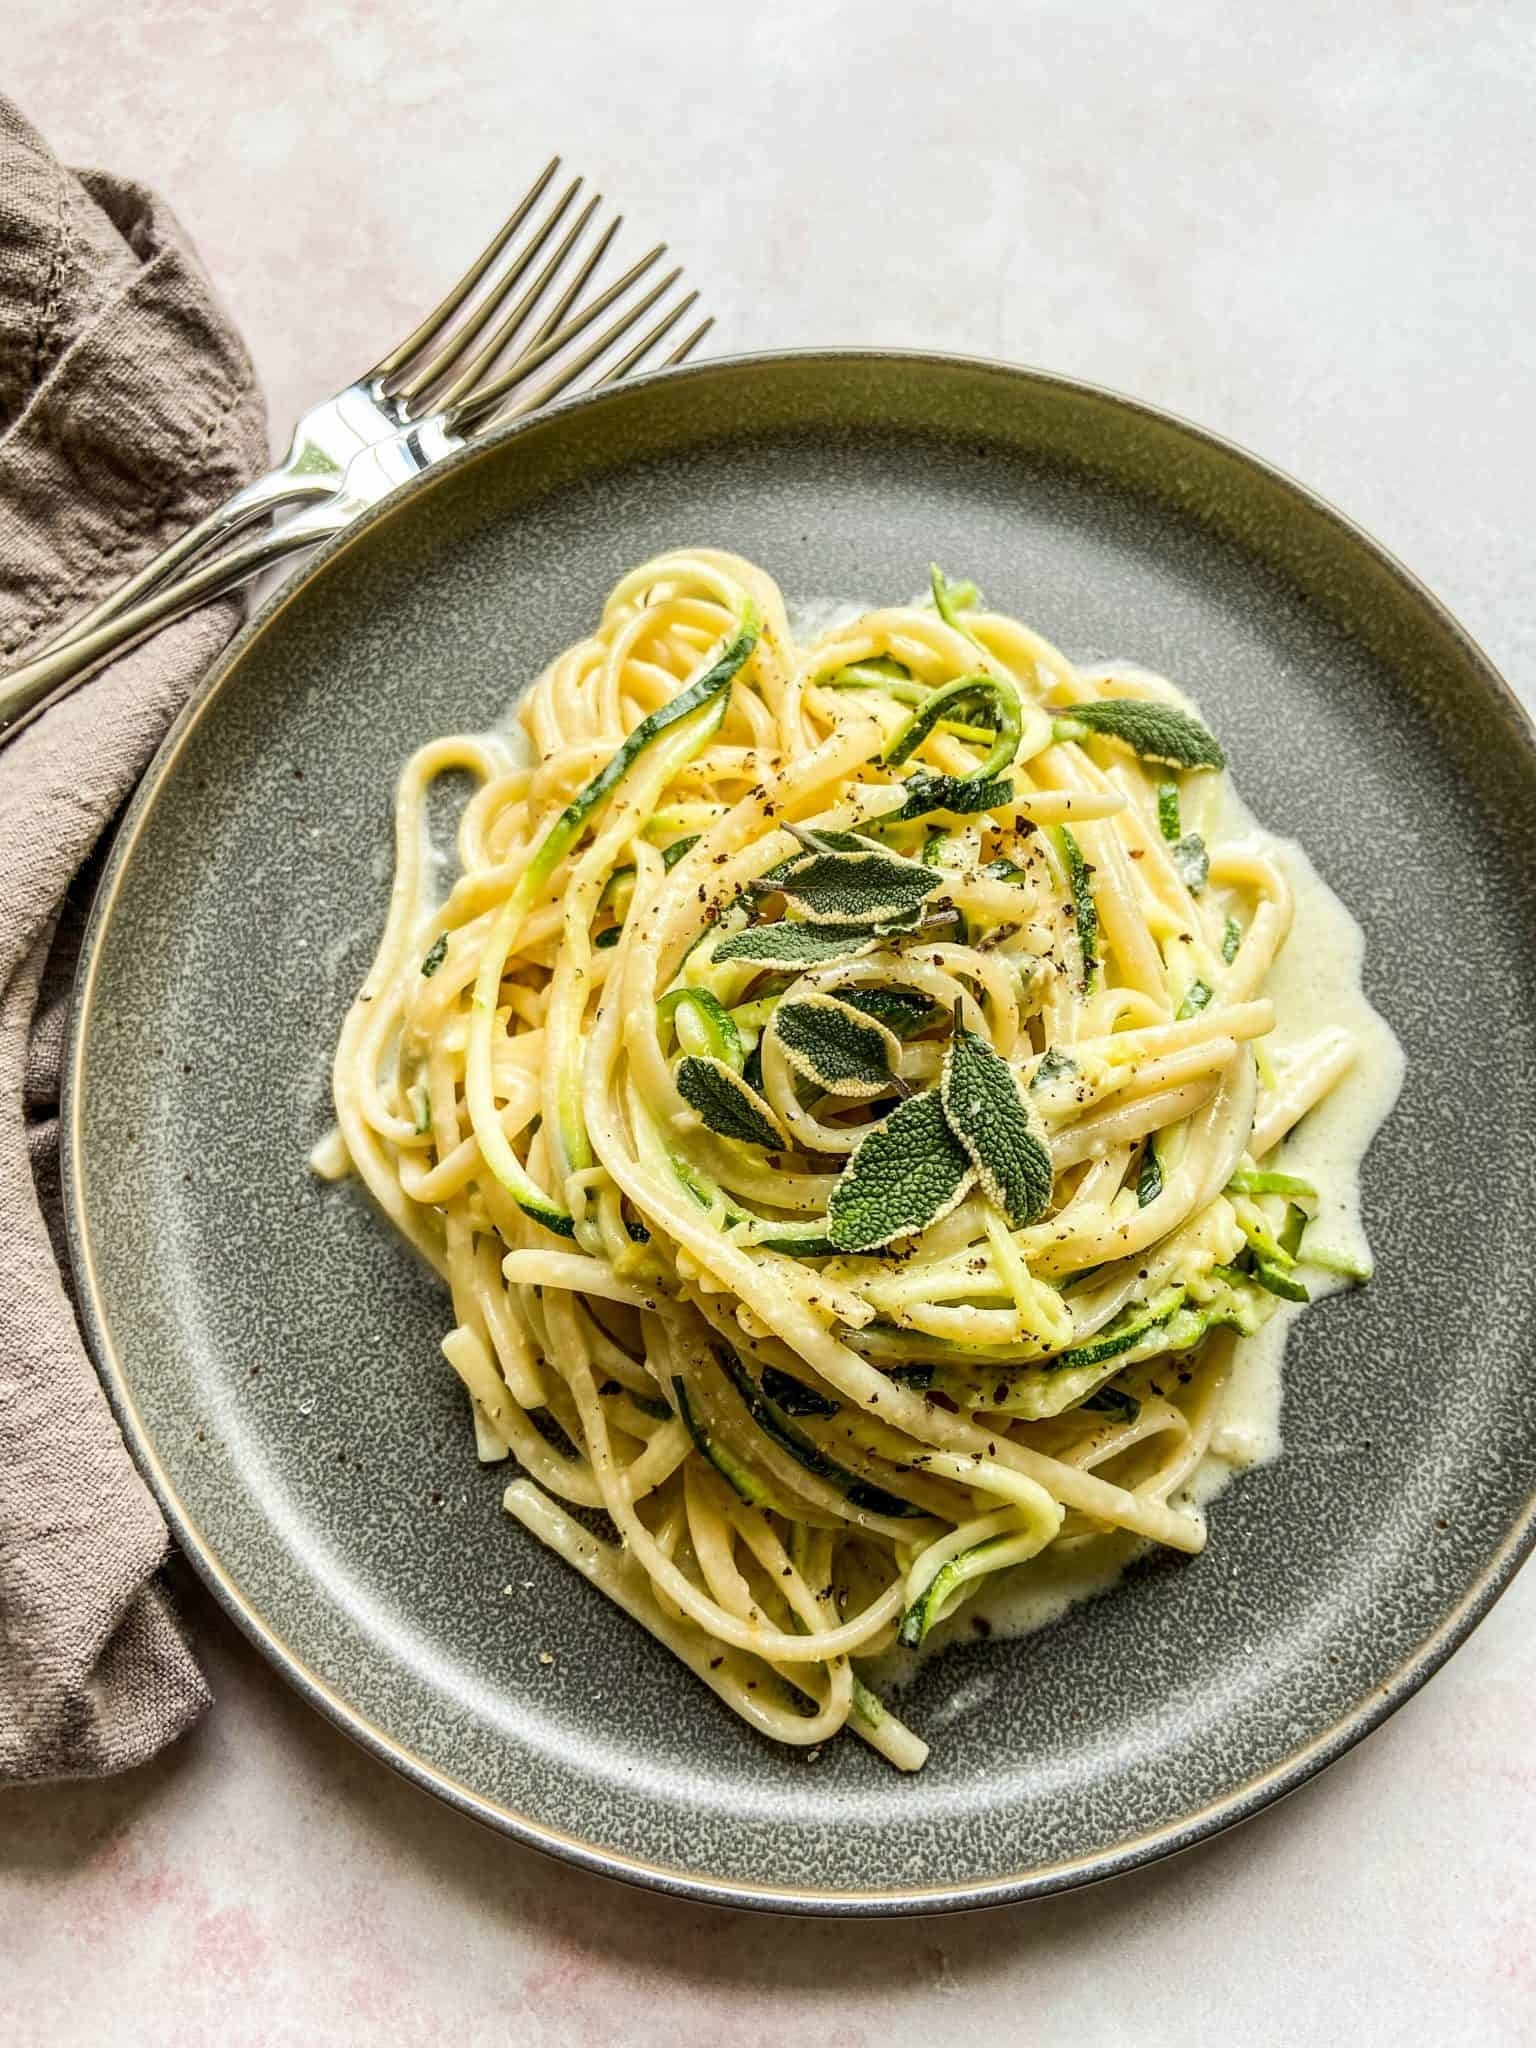 Zucchini noodles piled up on a grey plate topped with herbs